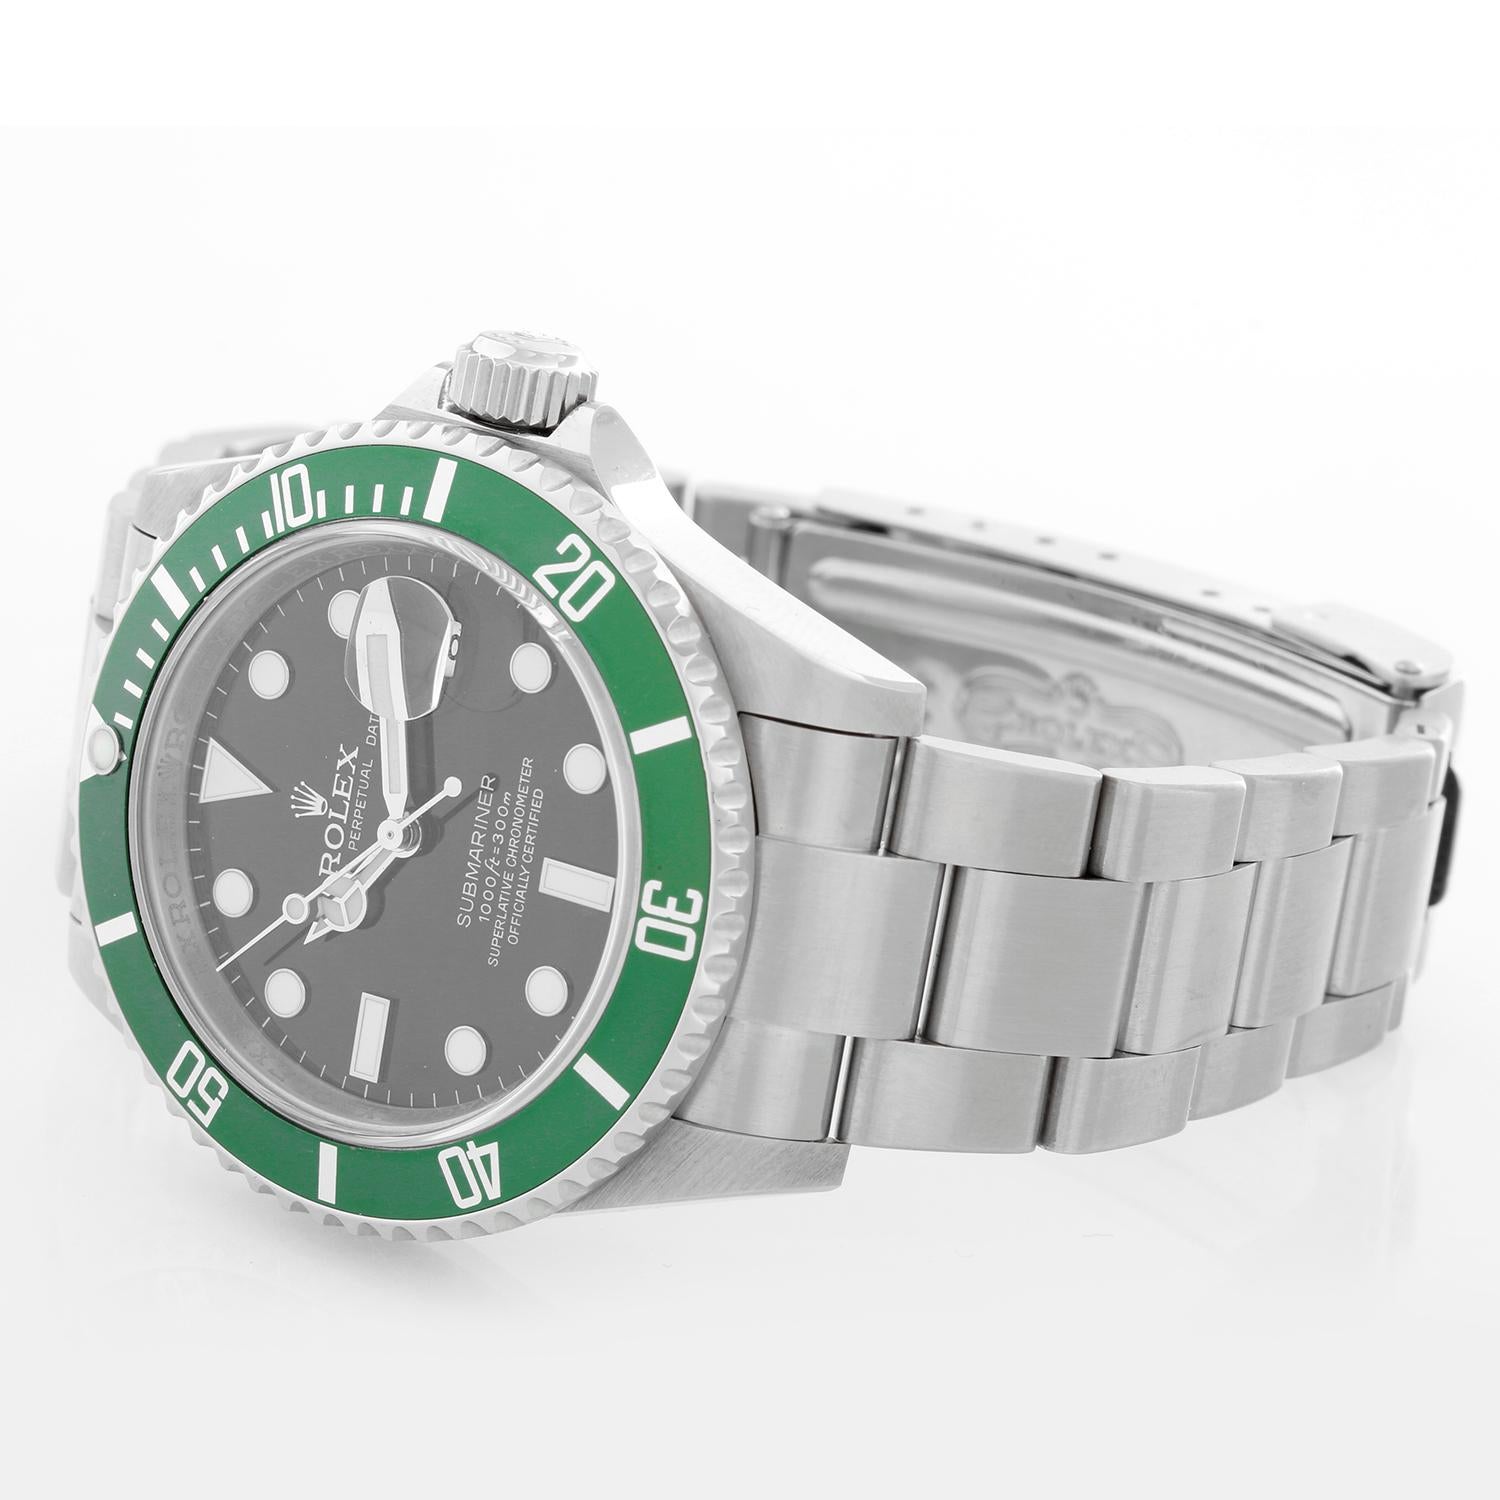 Rolex Kermit Submariner Men's  Stainless Steel Watch 16610 - Automatic winding, 31 jewels, pressure proof to 1,000 feet. Stainless steel case with time-lapse Cerachrom bezel . Black dial with luminous markers; date at 3 o'clock, green bezel.